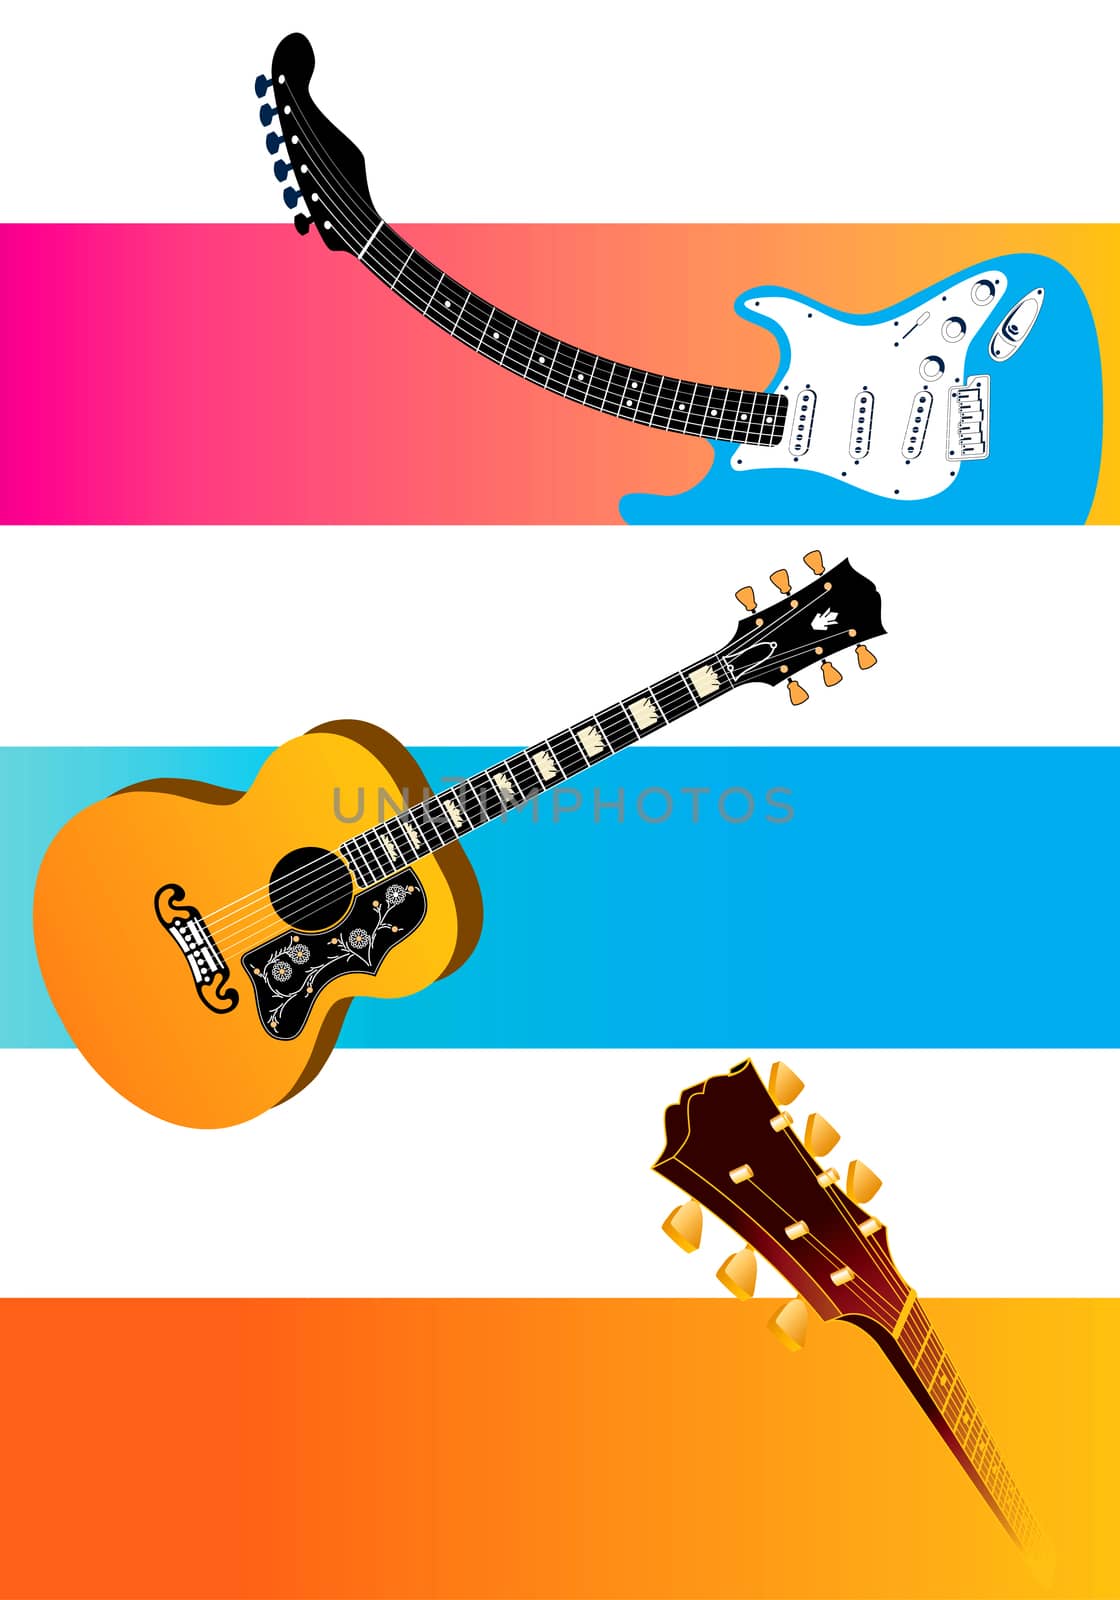 Classy Guitar Vector Banner Design template on which to place your text







Guitar Vector Banner Design template